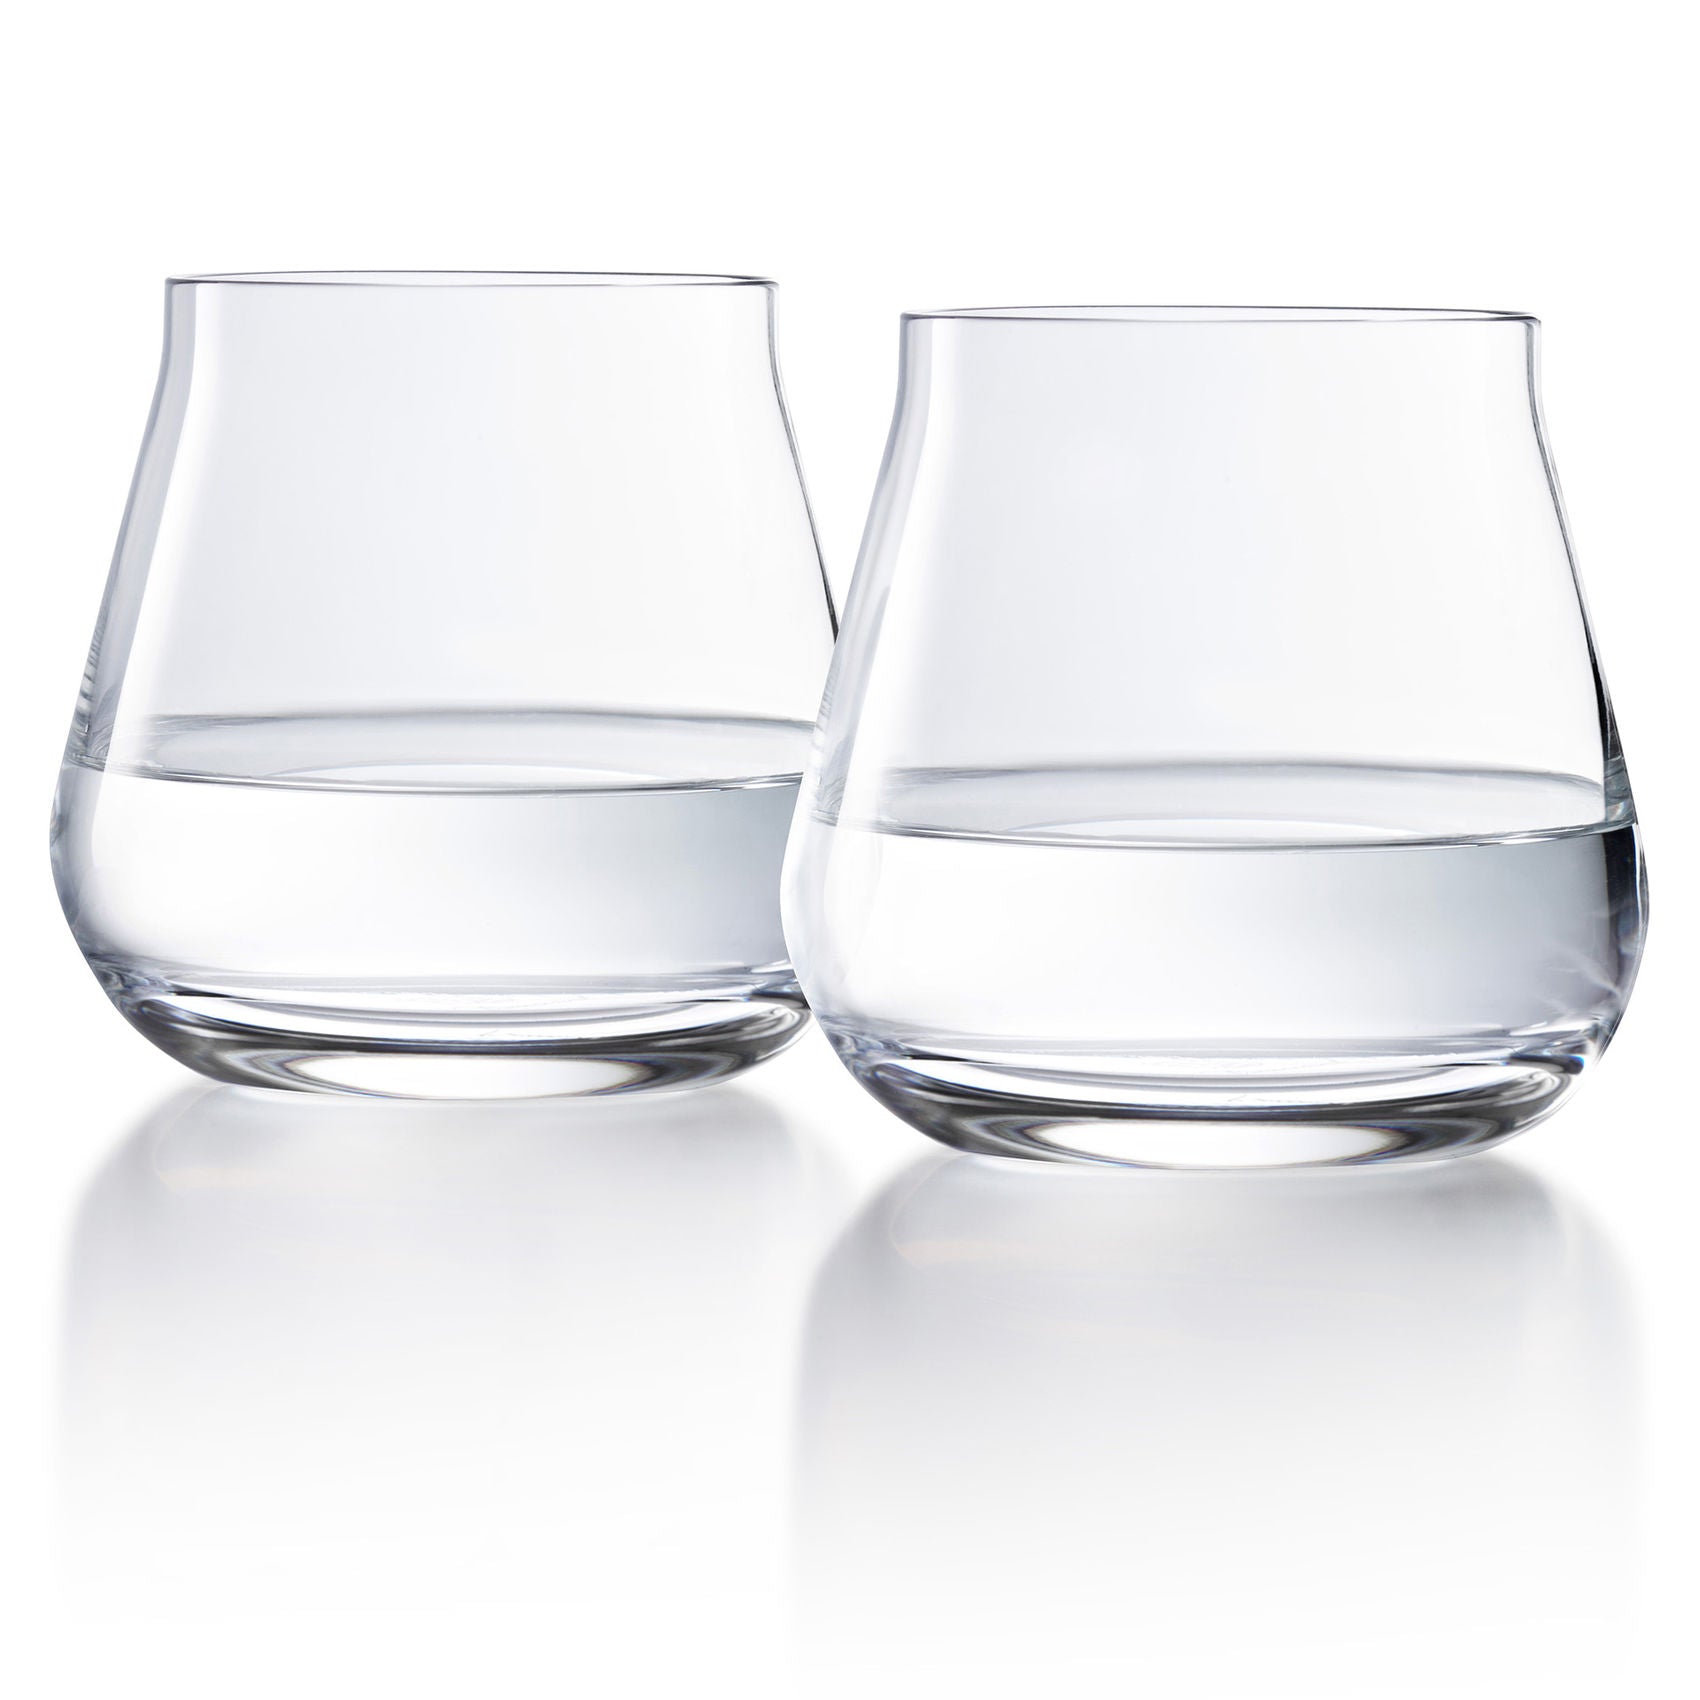 Quinn Red Wine Glasses, Set of 2 - Jung Lee NY